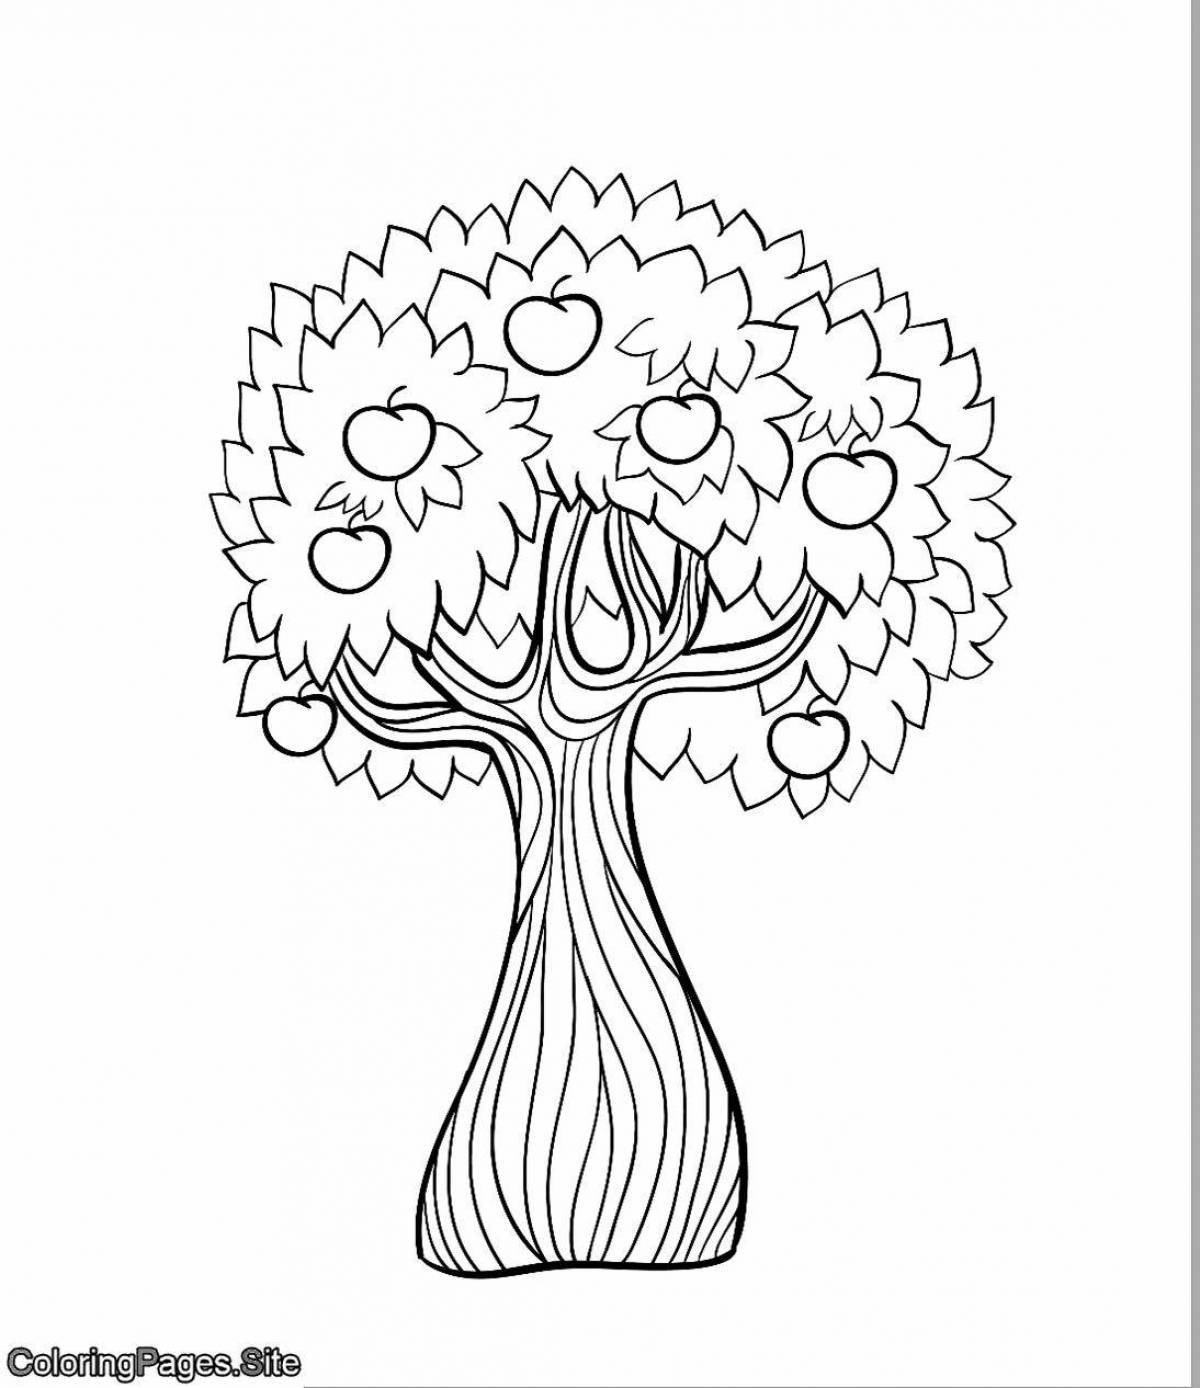 Glorious tree coloring page for 6-7 year olds